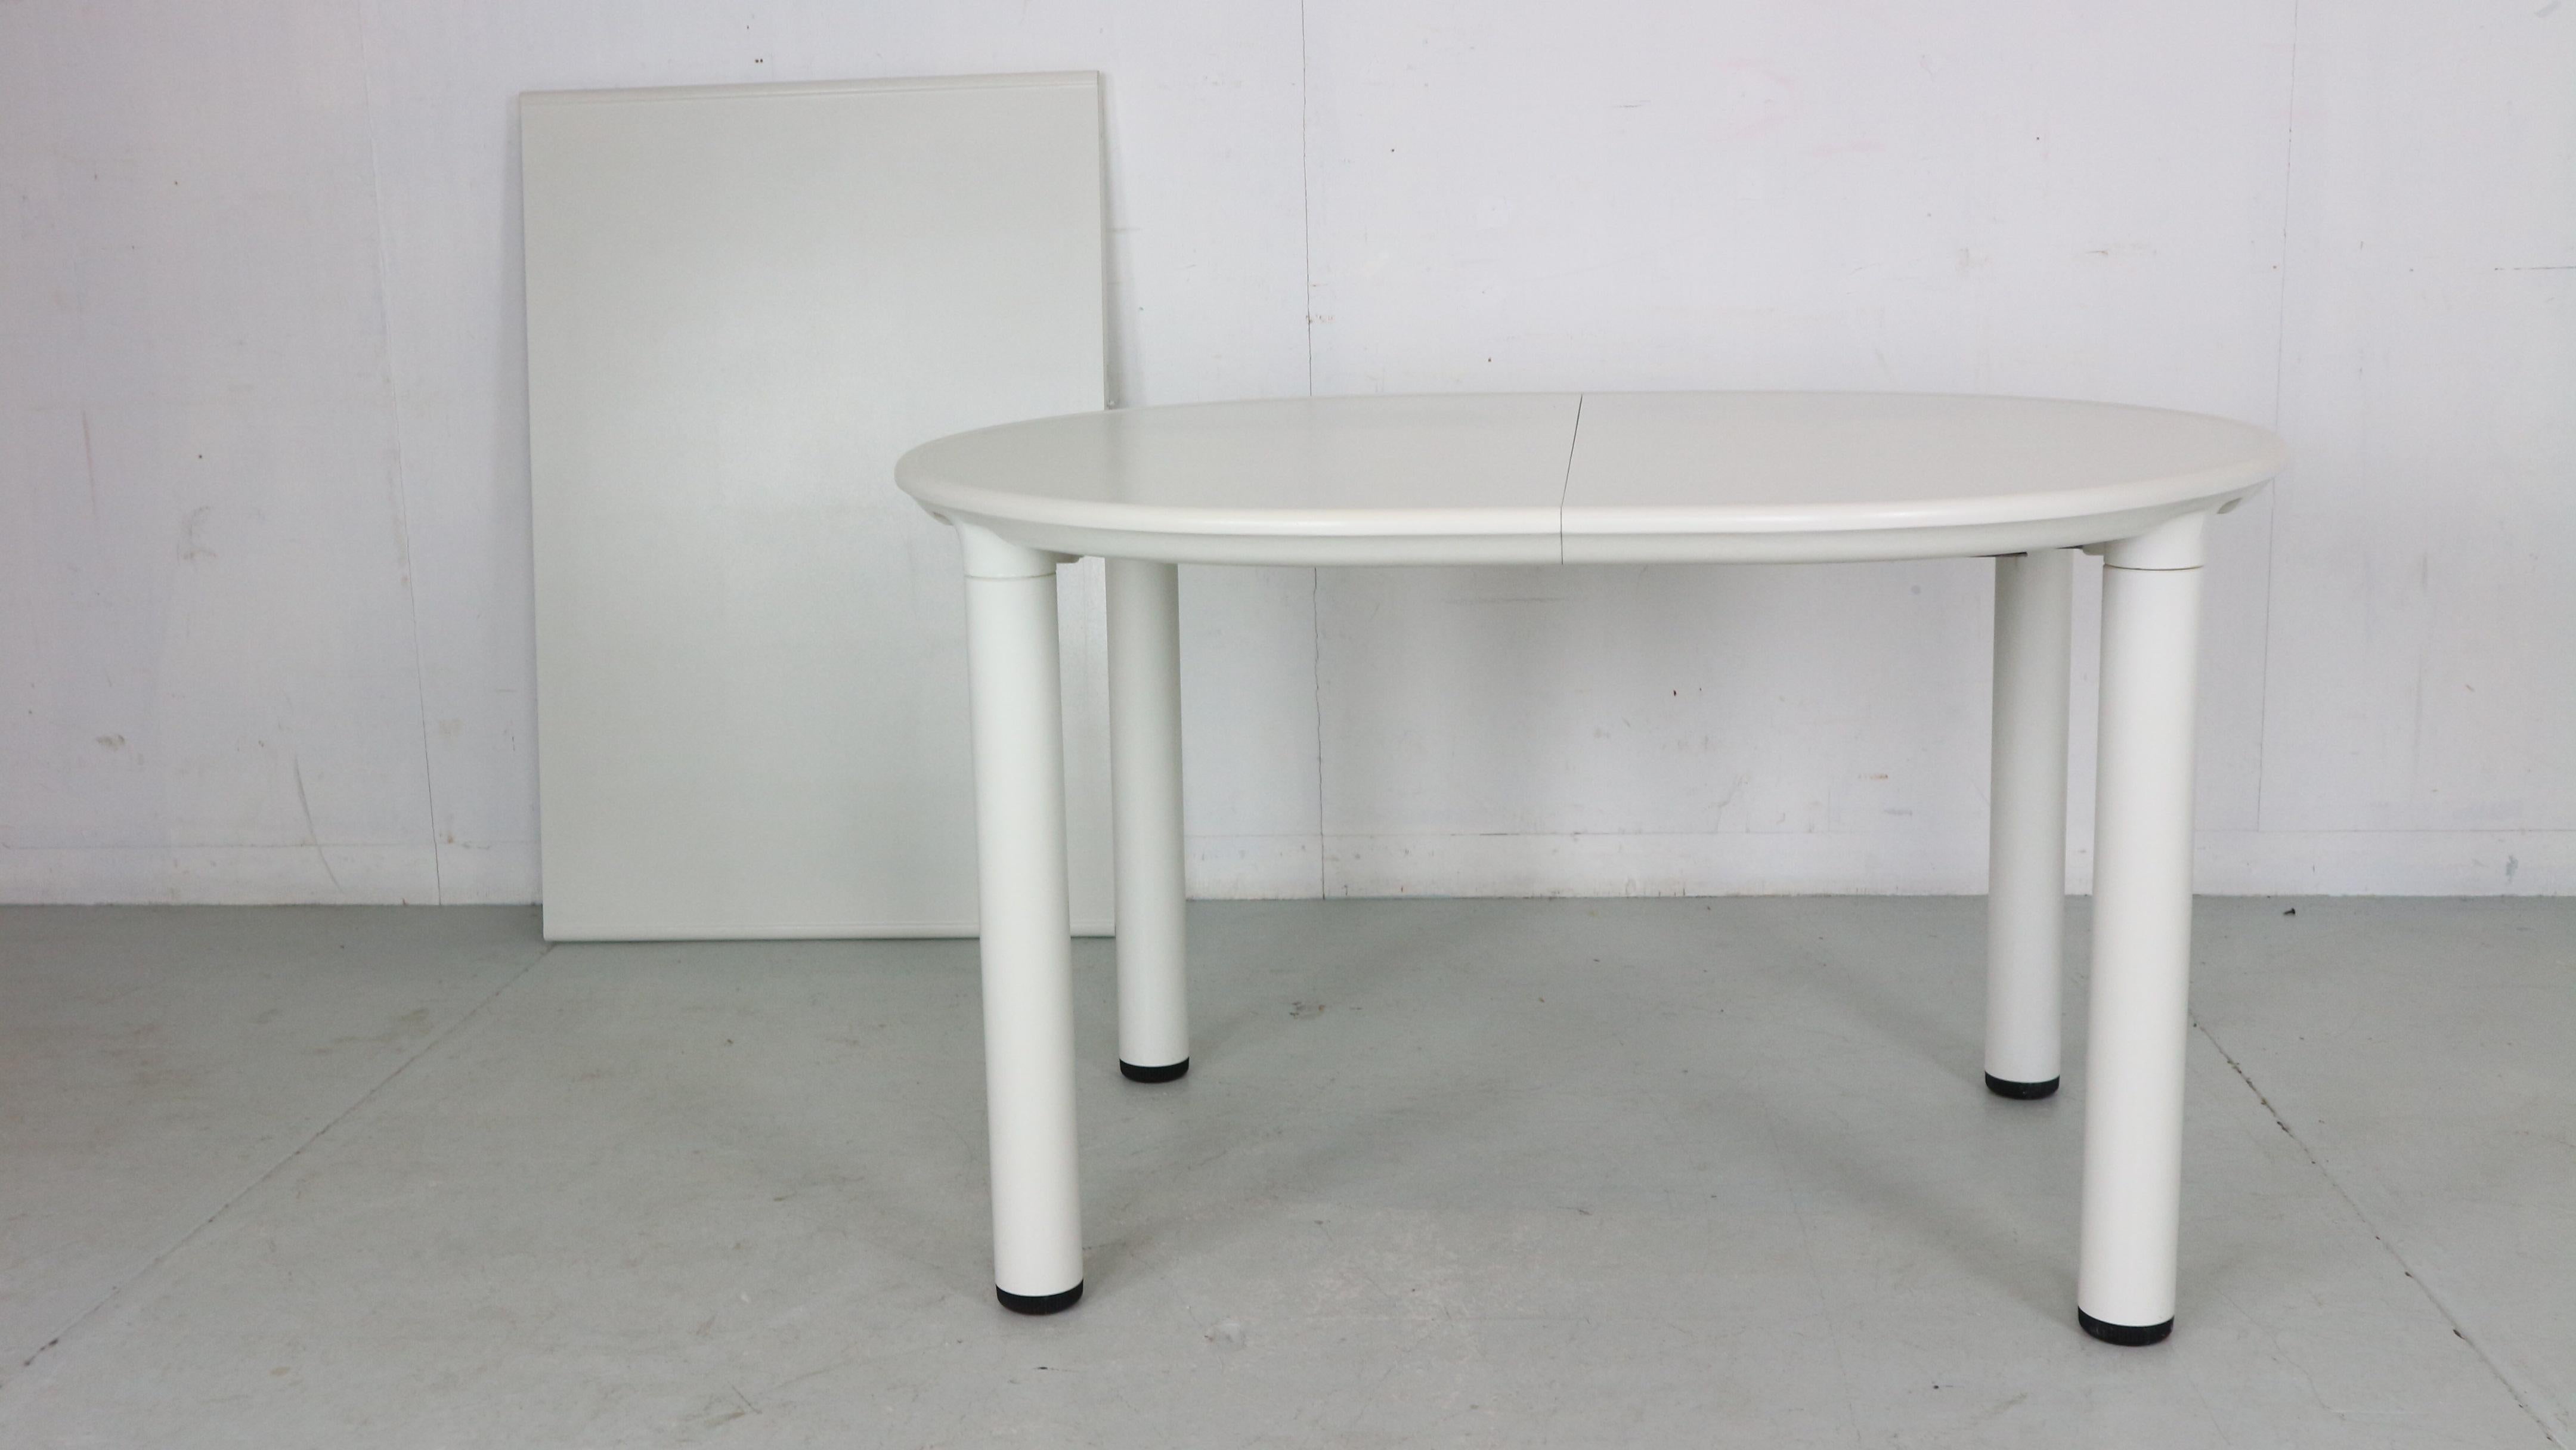 Very rare extendable dinning/ conference table by famous German furniture designer Dieter Rams and manufactured for Vitsoe in 1972.
Model number- 720, original mark on the bottom of the table.
Easily extendable from round table to an oval shape form